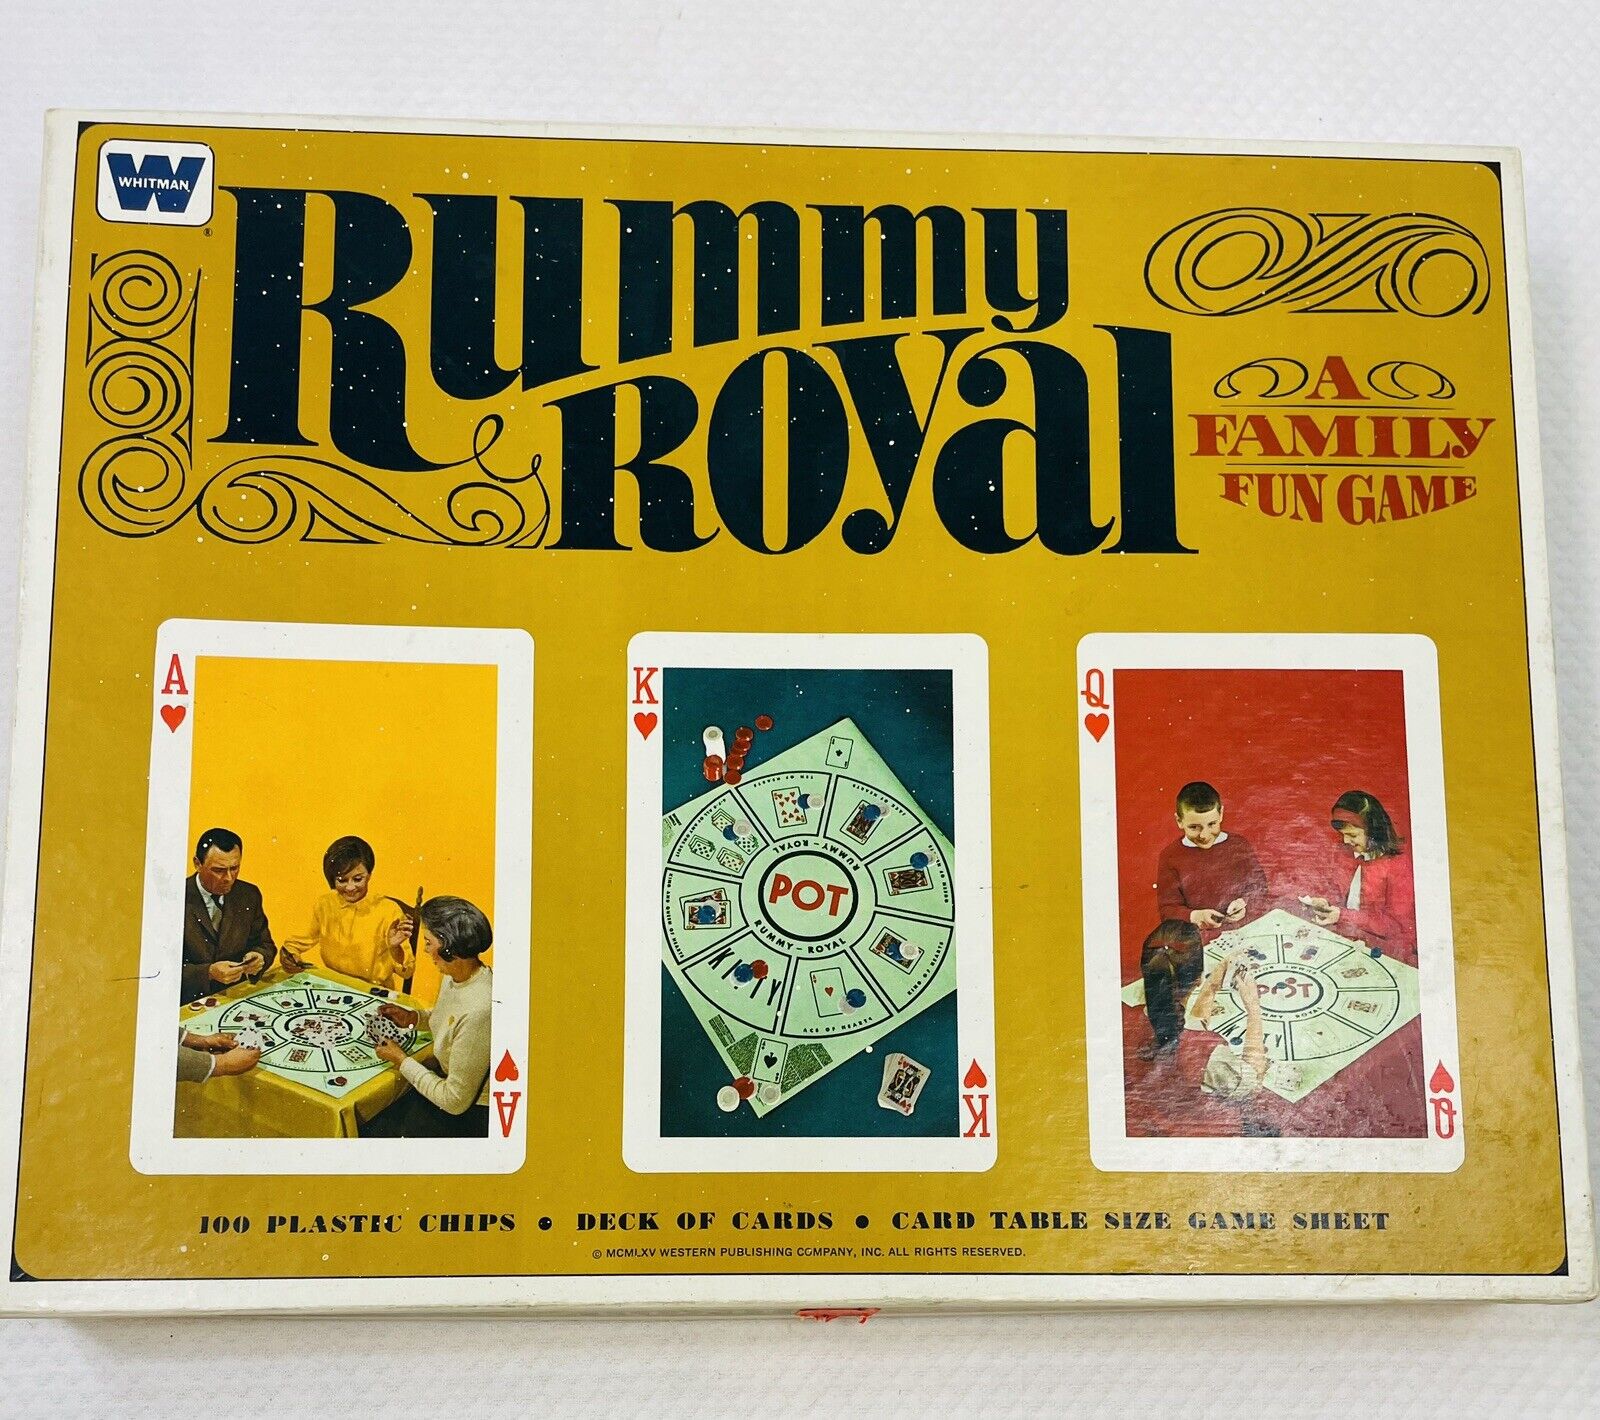 Vintage 1965 Rummy Royal Card Board Game Set by Whitman #4804